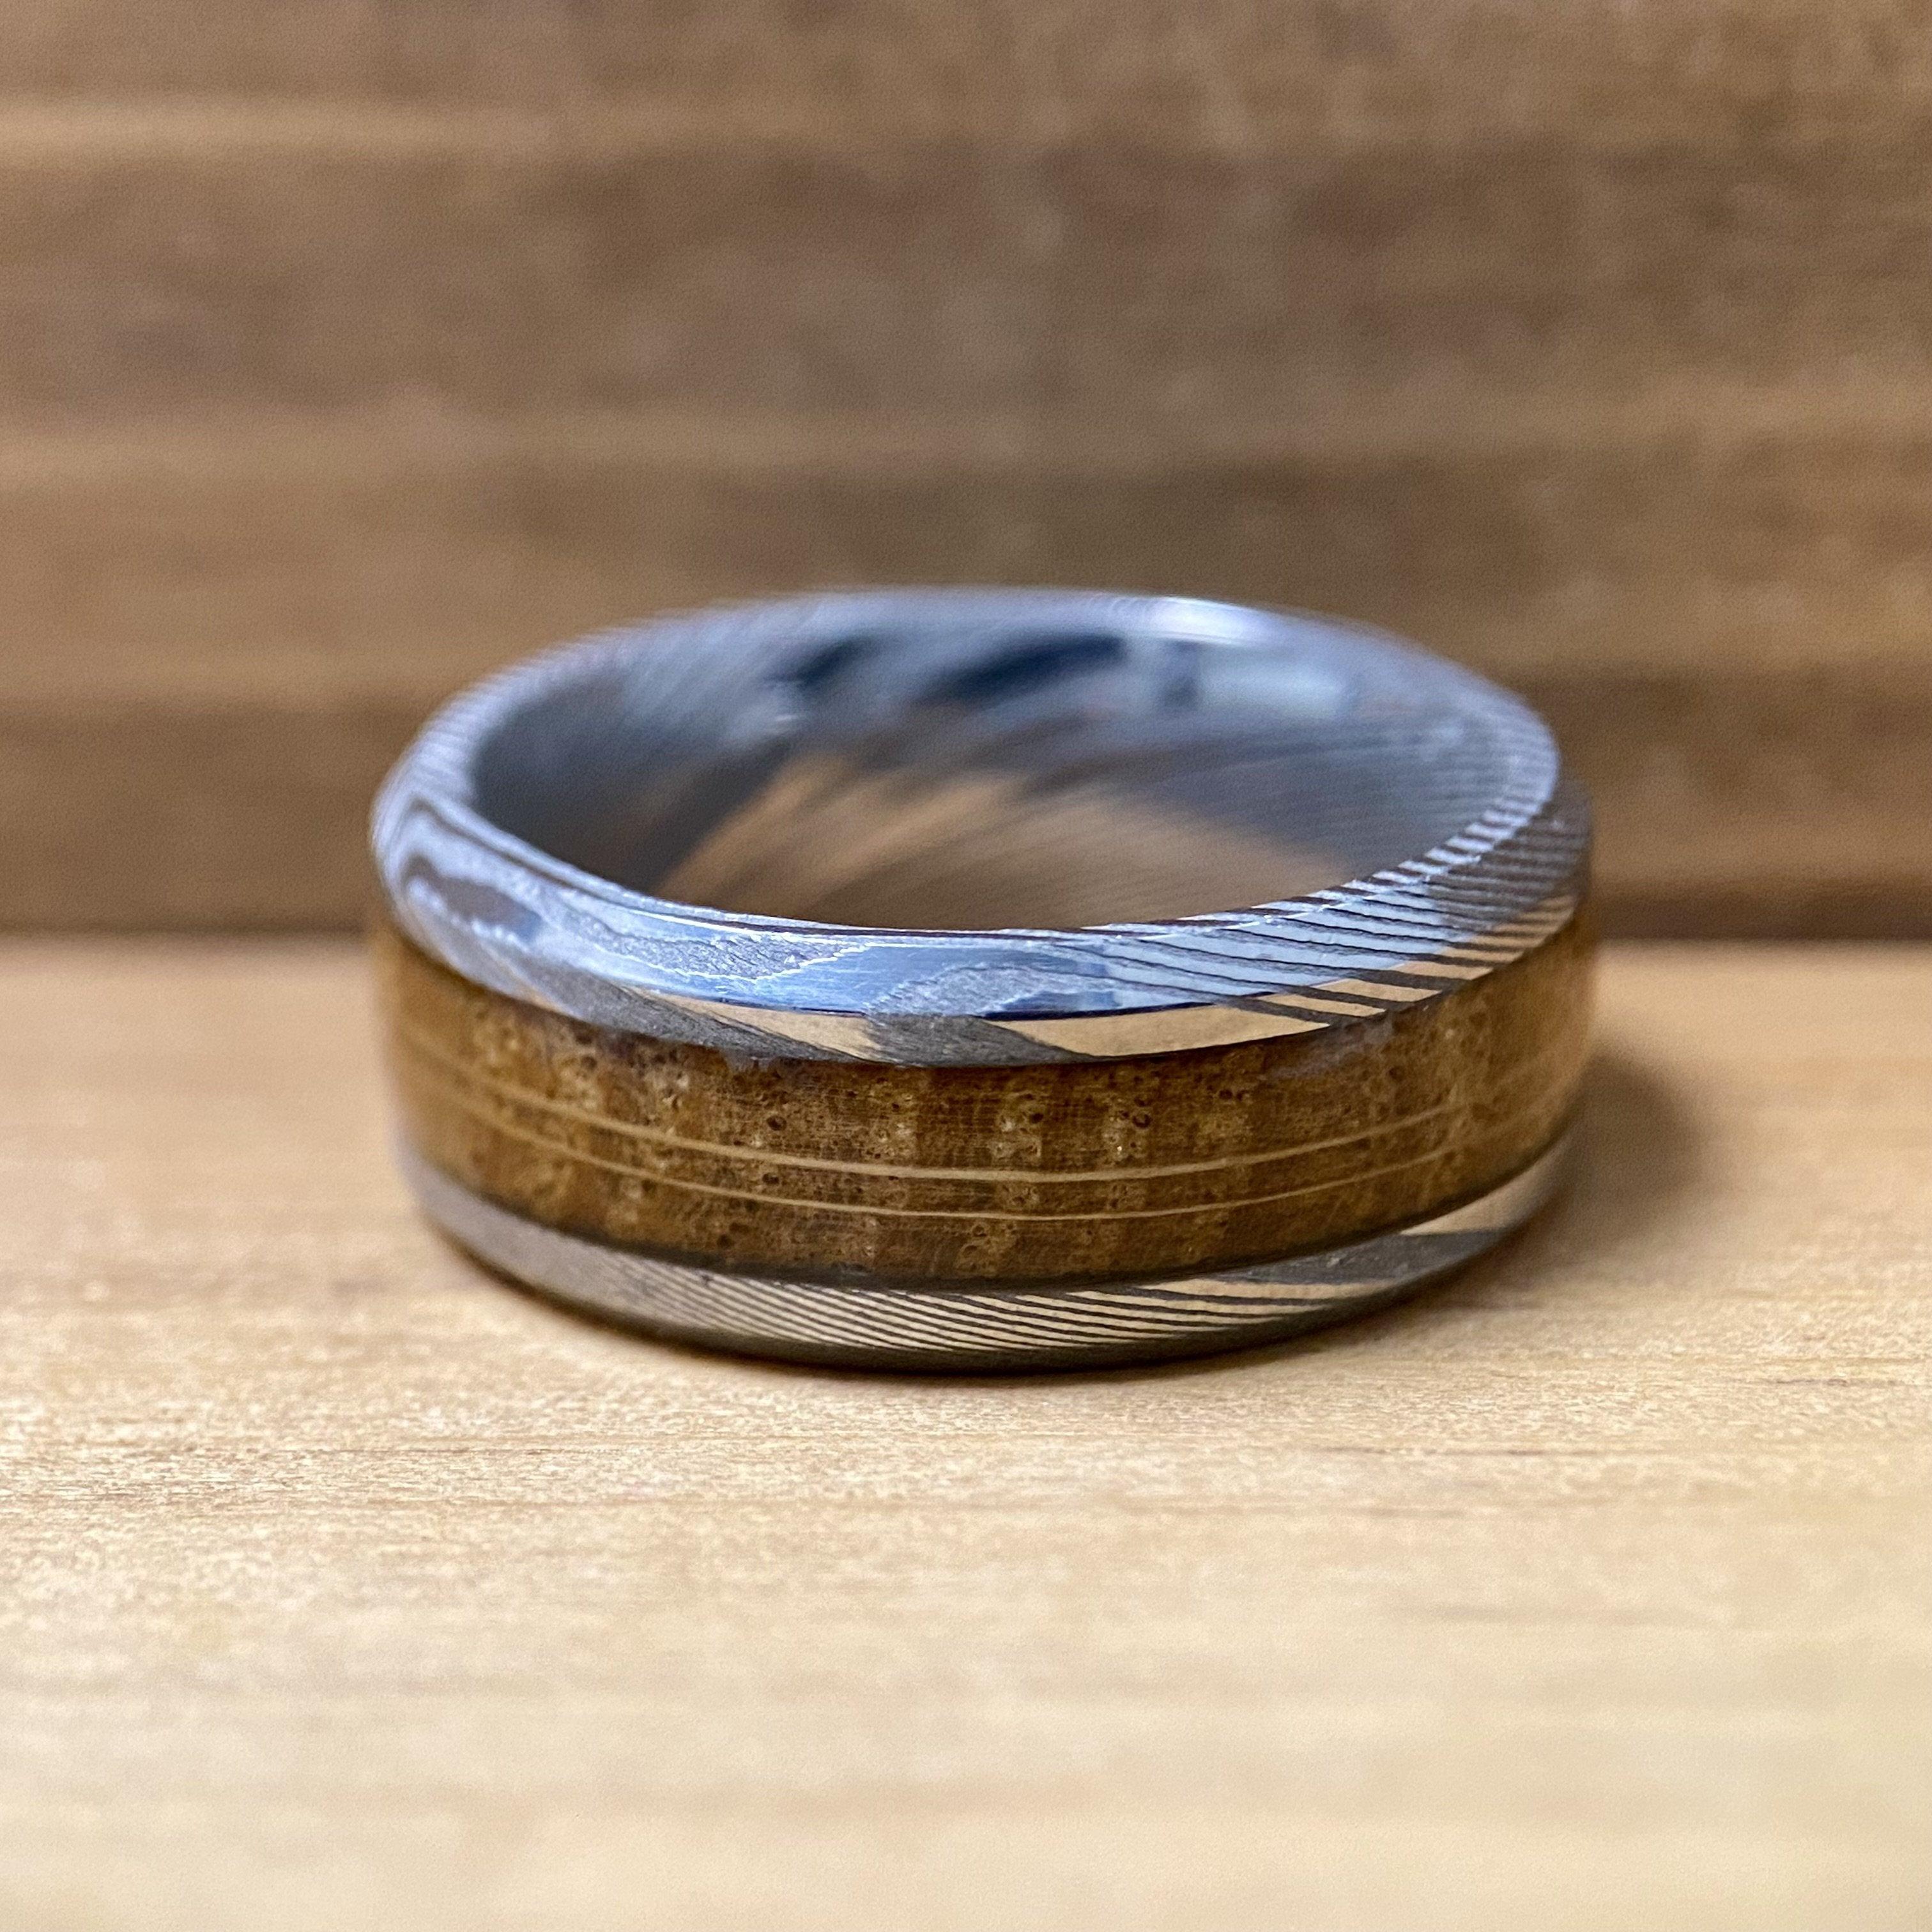 "The Rustic Warrior" Damascus Steel Design Ring With Wood From A Reclaimed Bourbon Whiskey Barrel Wedding Band BW James Jewelers 